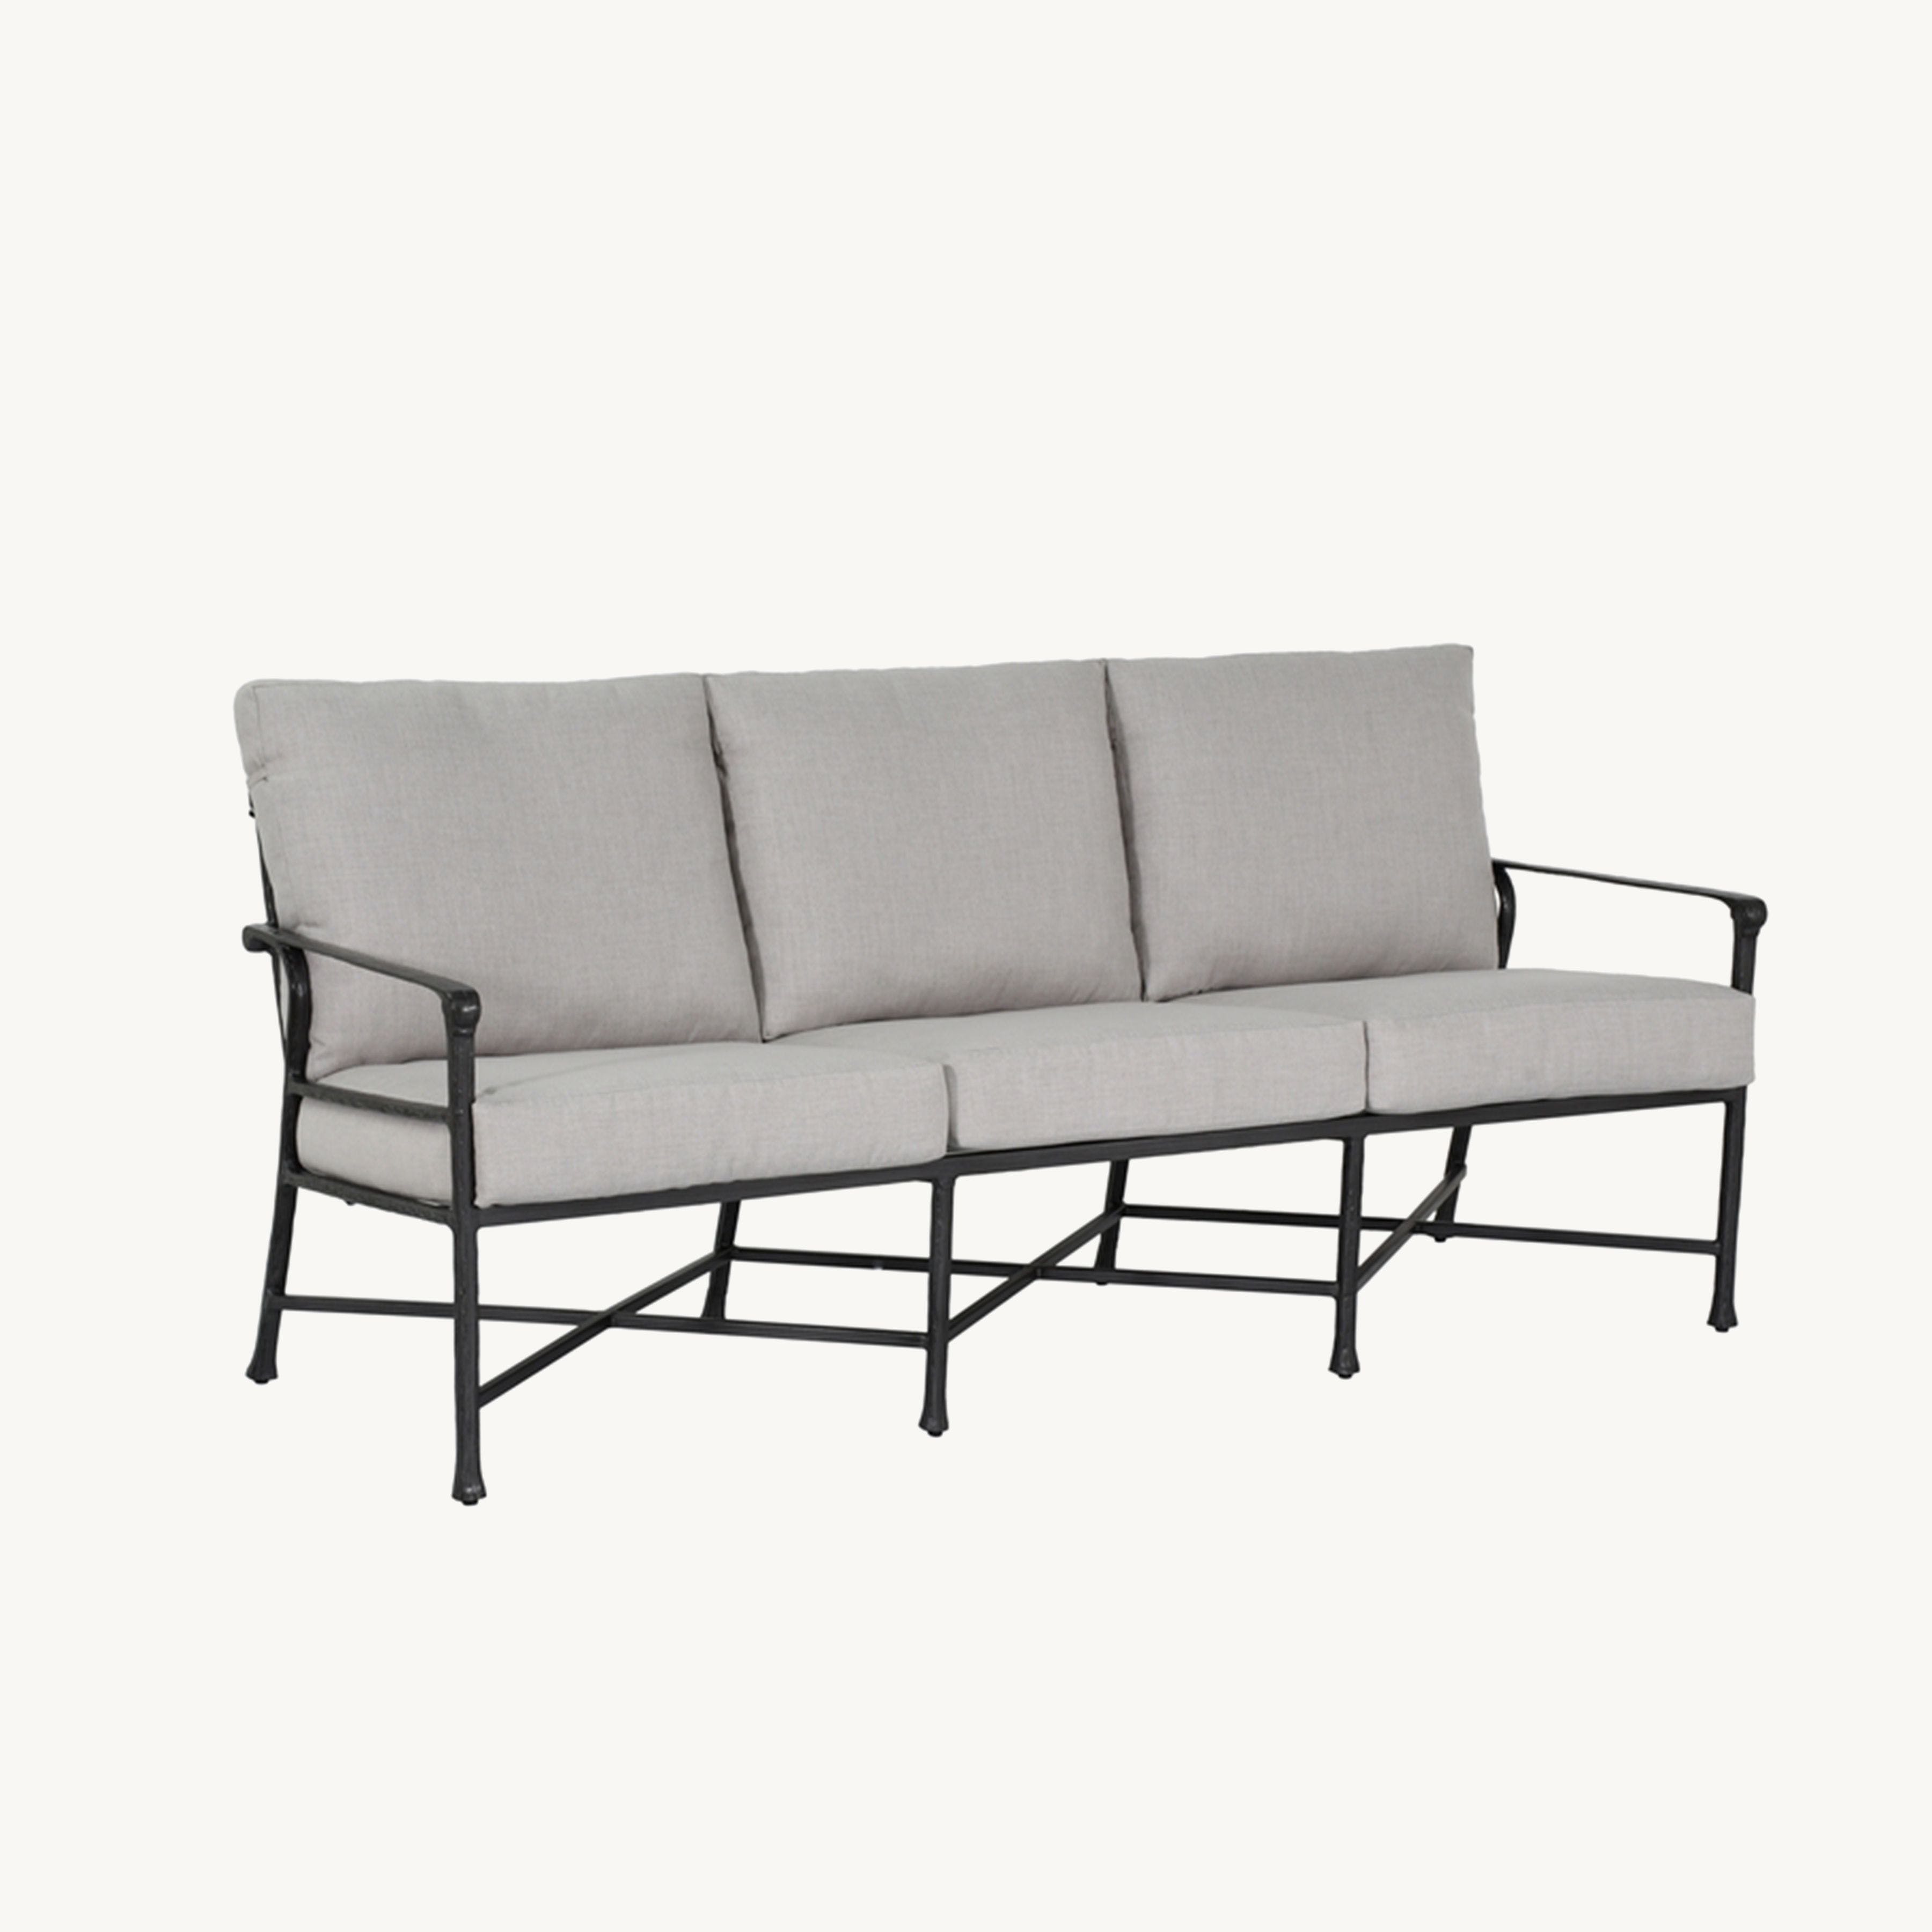 Marquis Deep Seating Set By Castelle